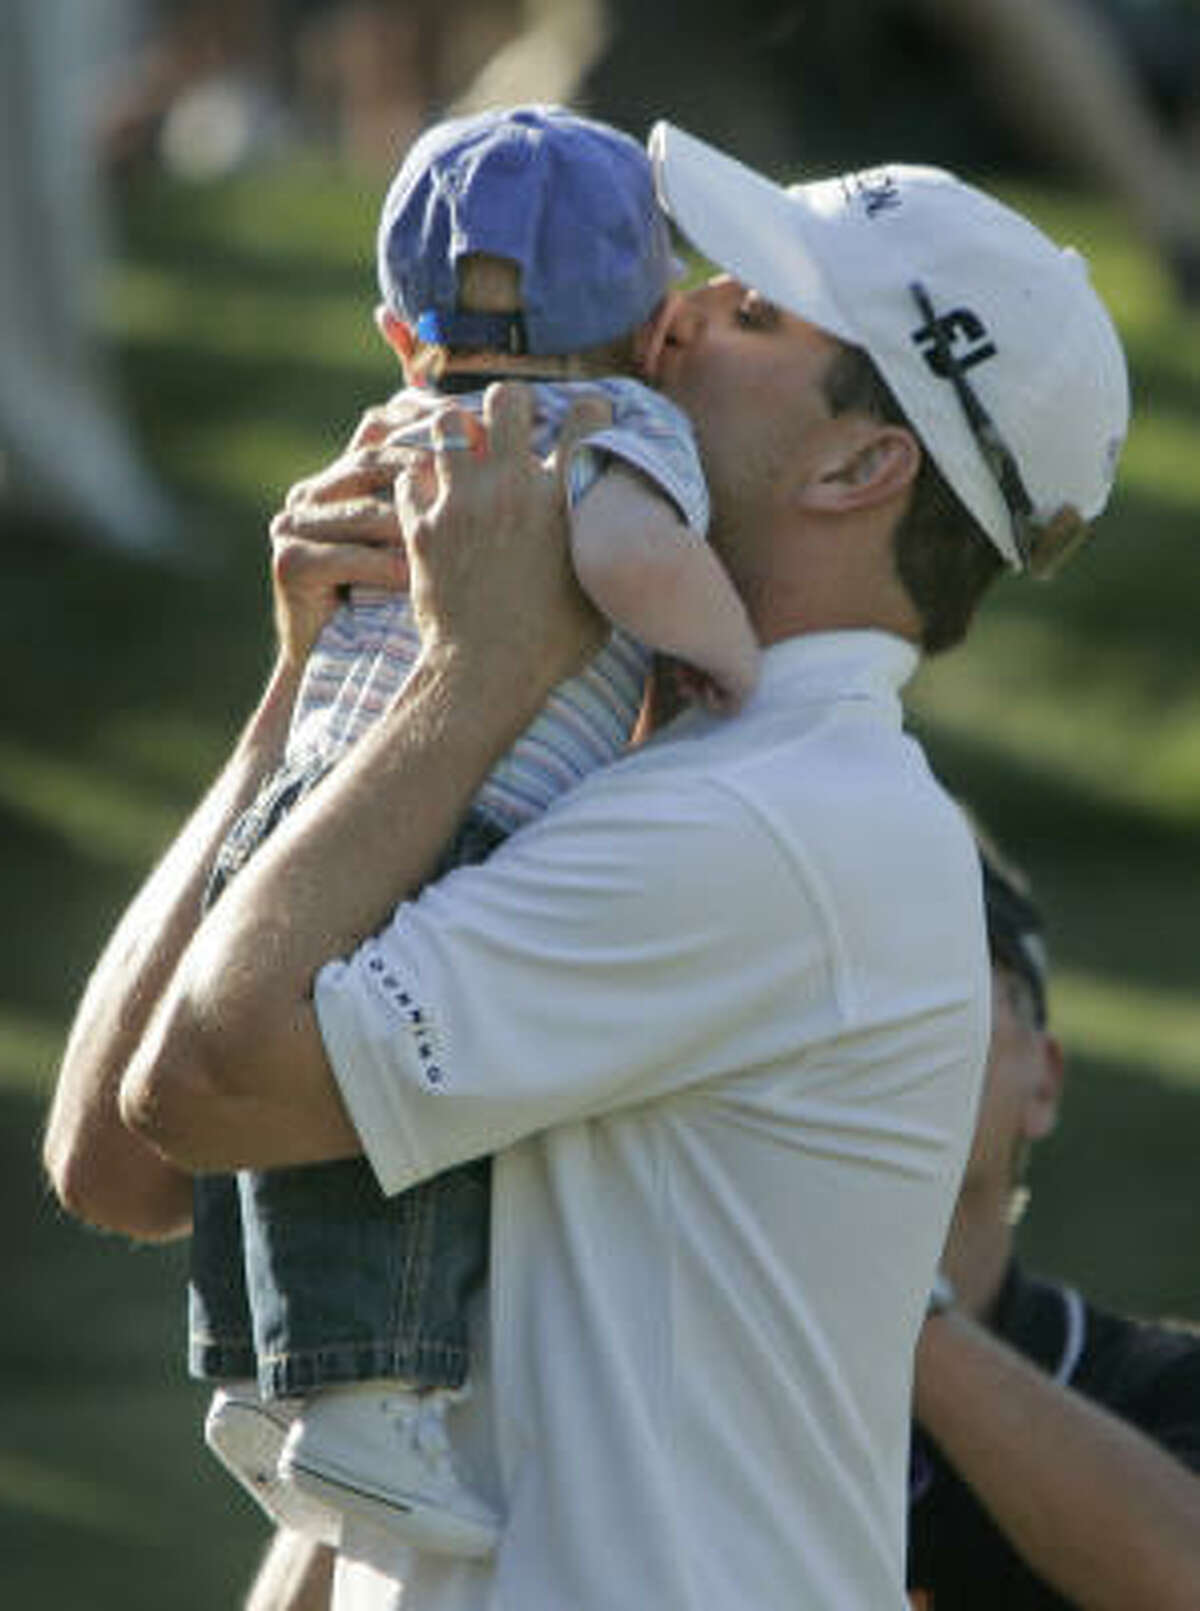 Zach Johnson celebrates with his four-month-old son, Will, after defeating Ryuji Imada in a one-hole playoff to win the AT&T Classic.